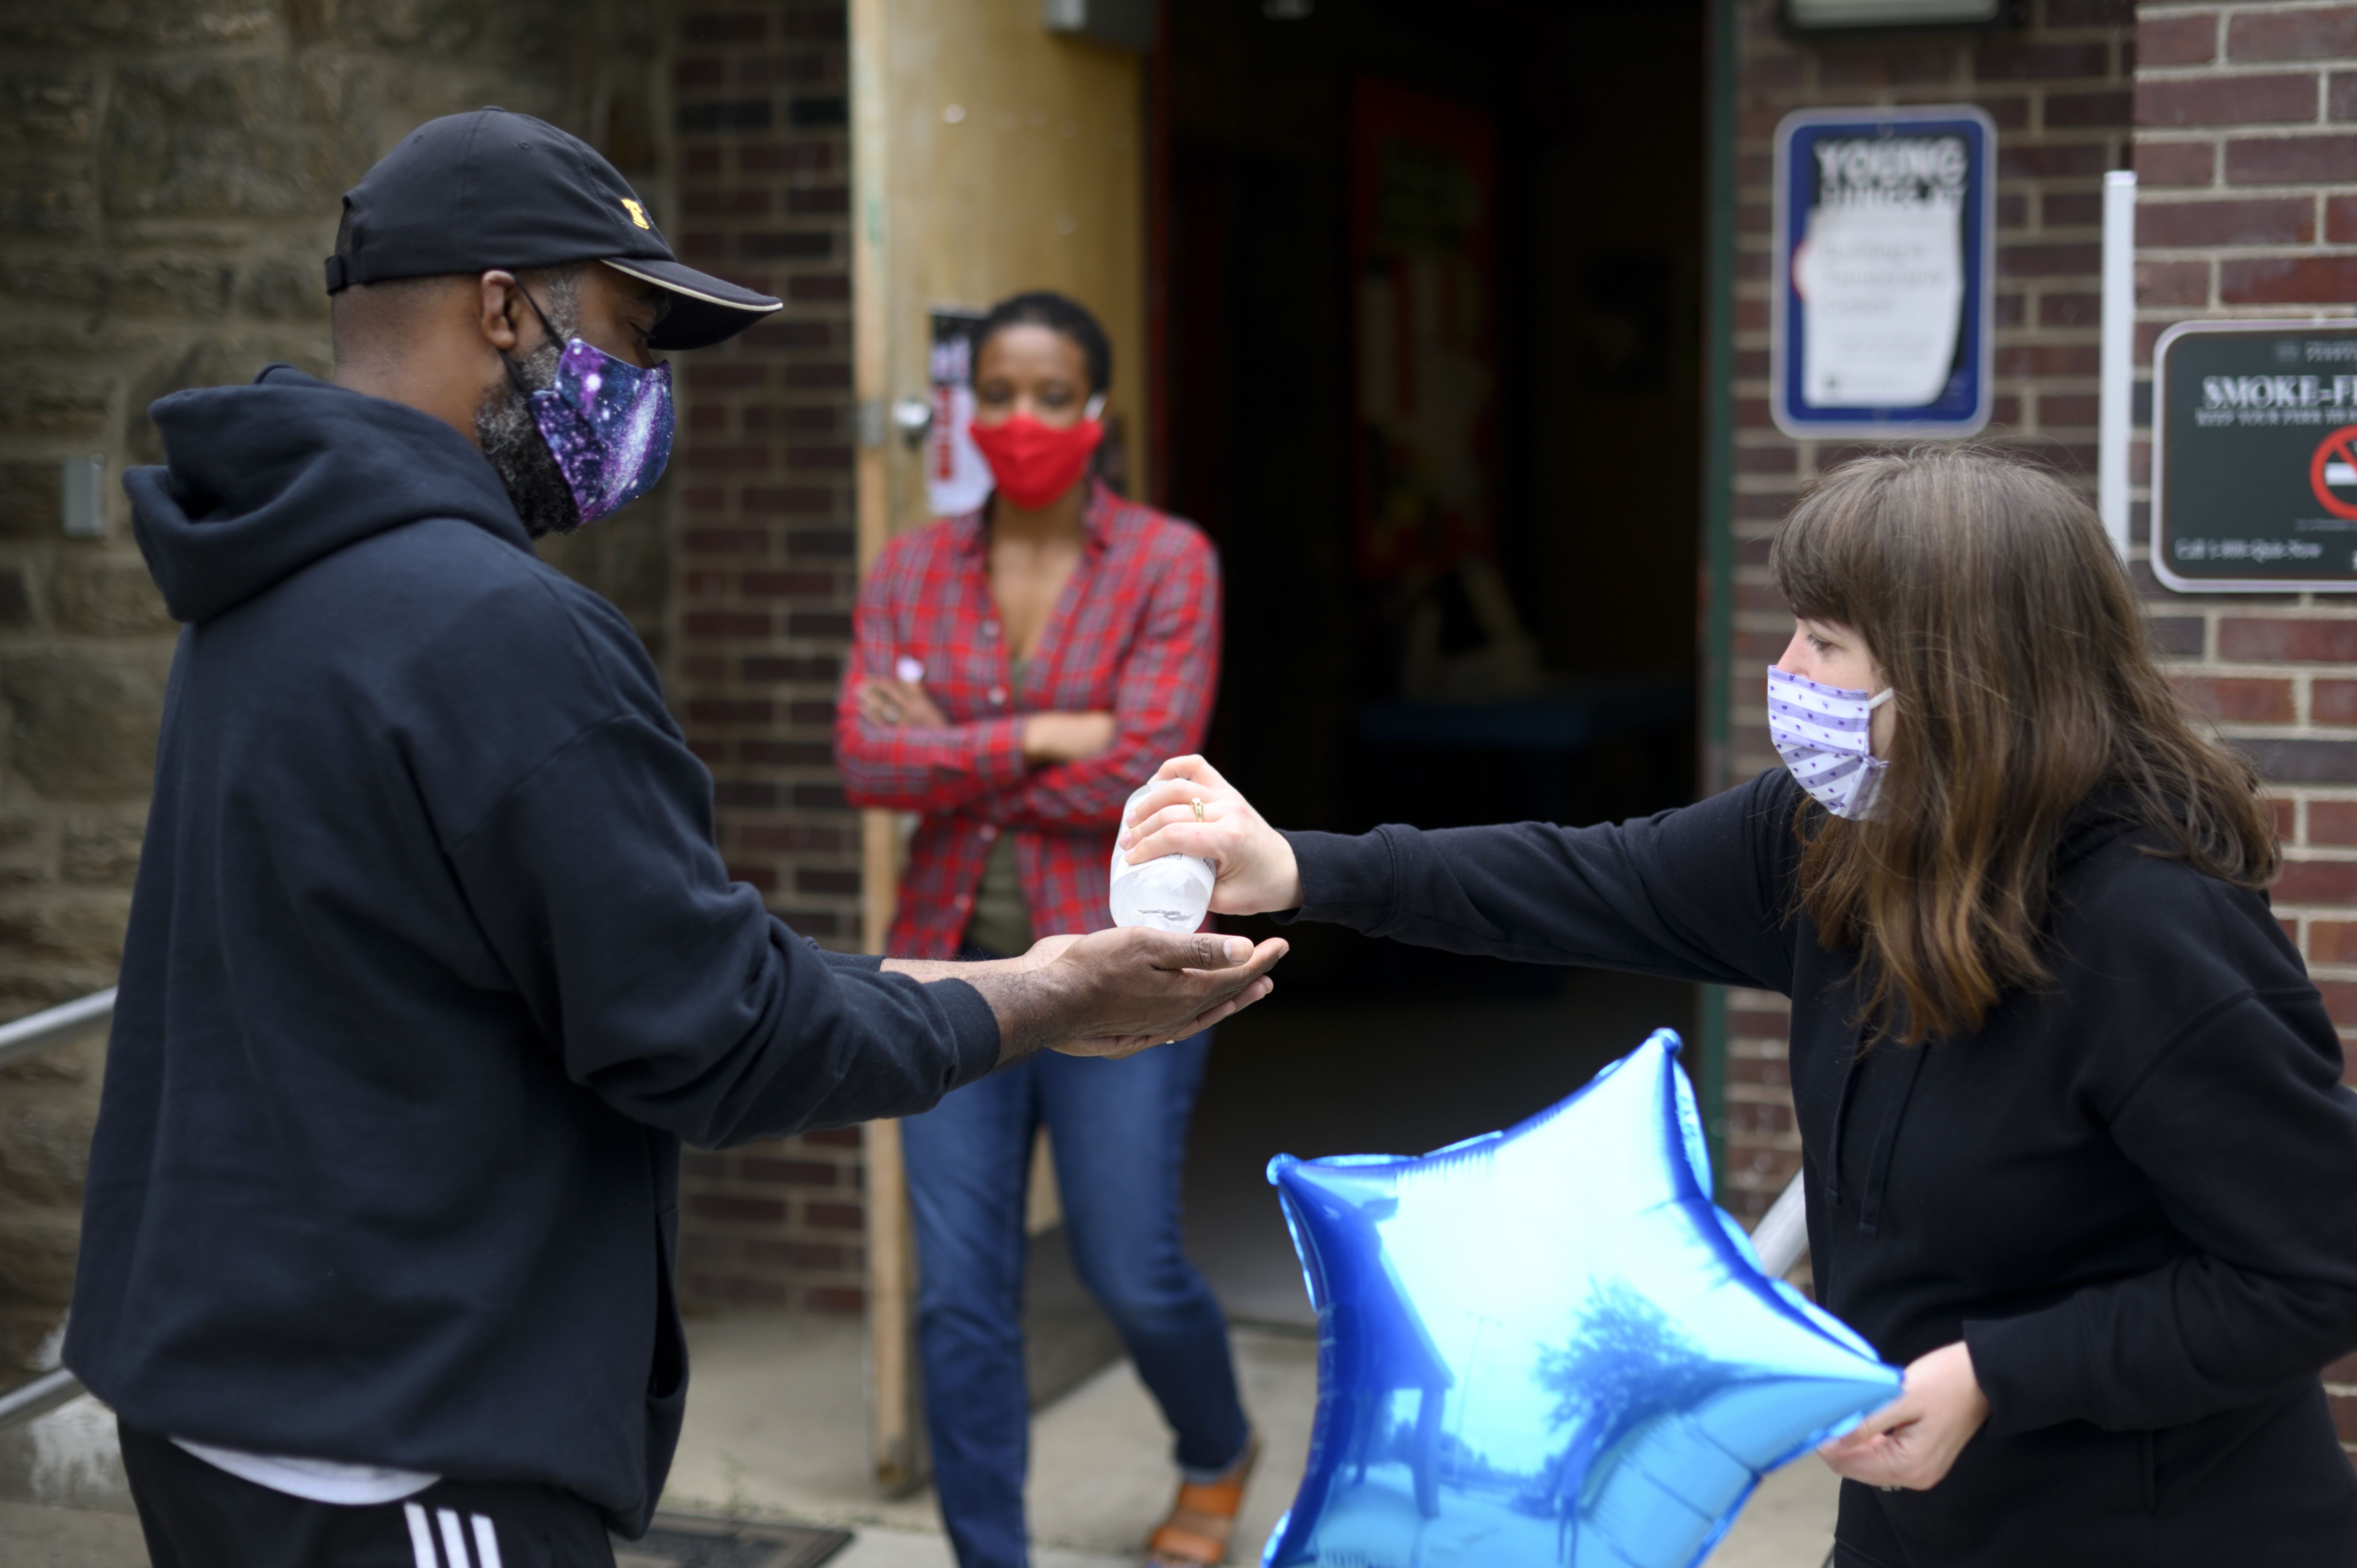 A woman offers hand sanitizer to a man wearing a face mask outside of an open doorway